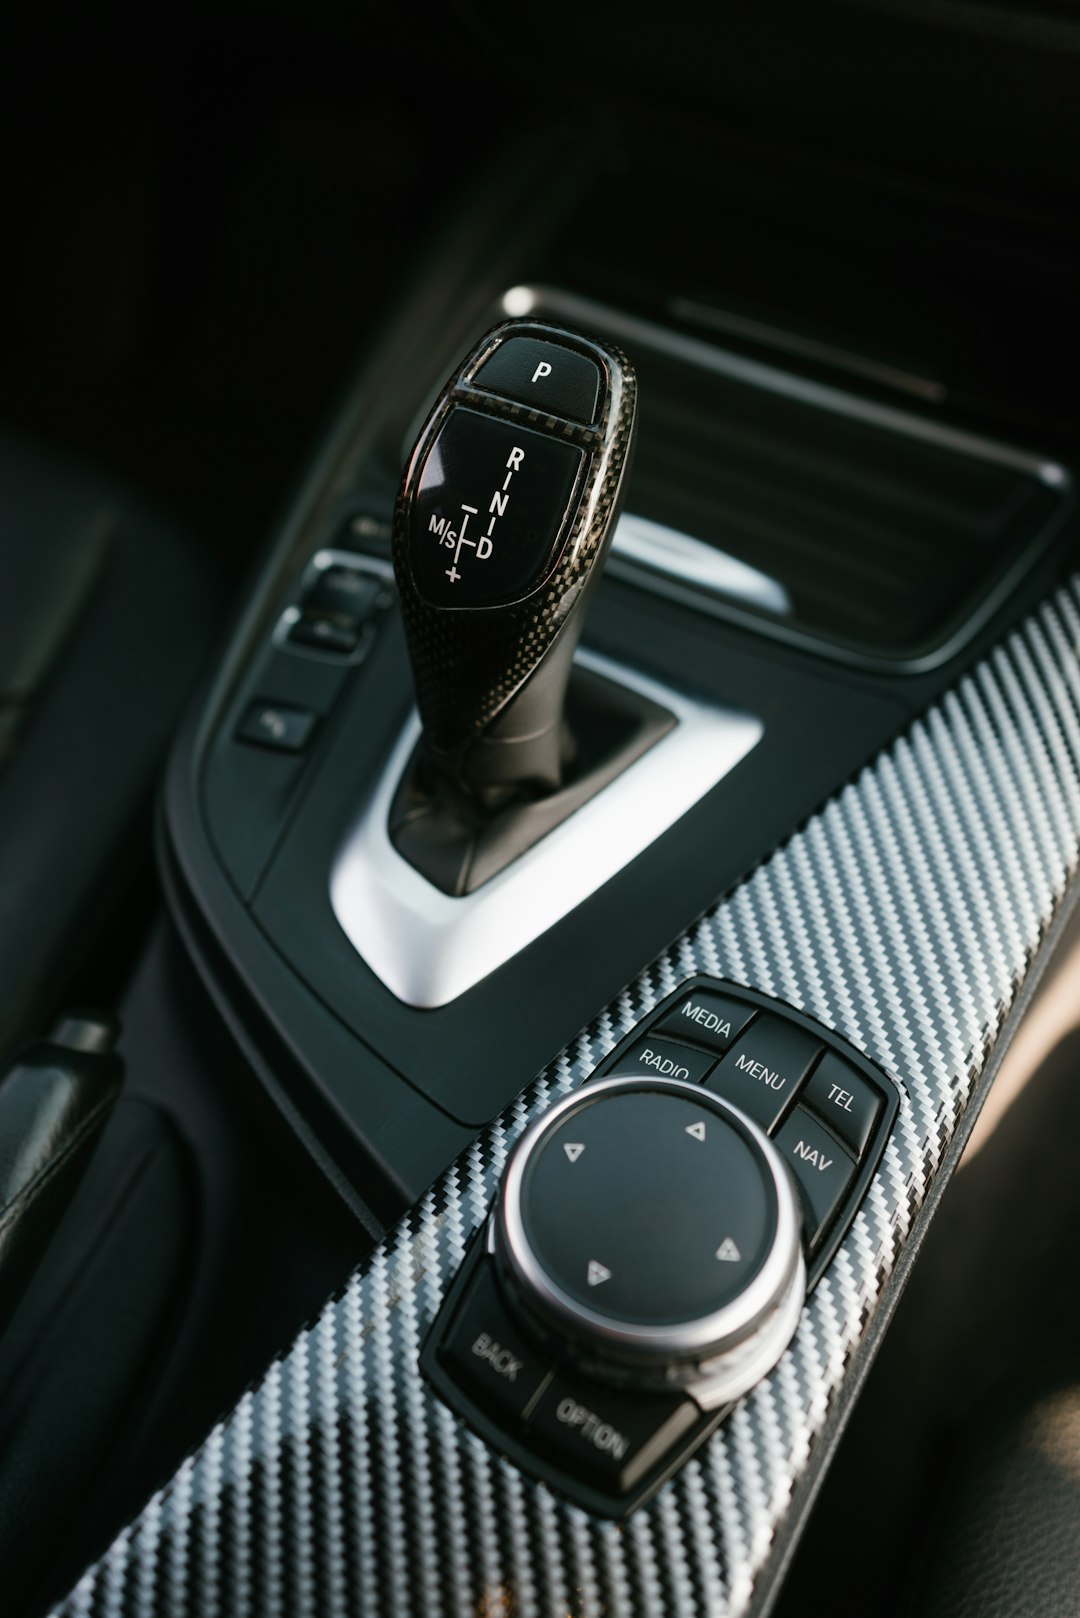 black and silver gear shift lever